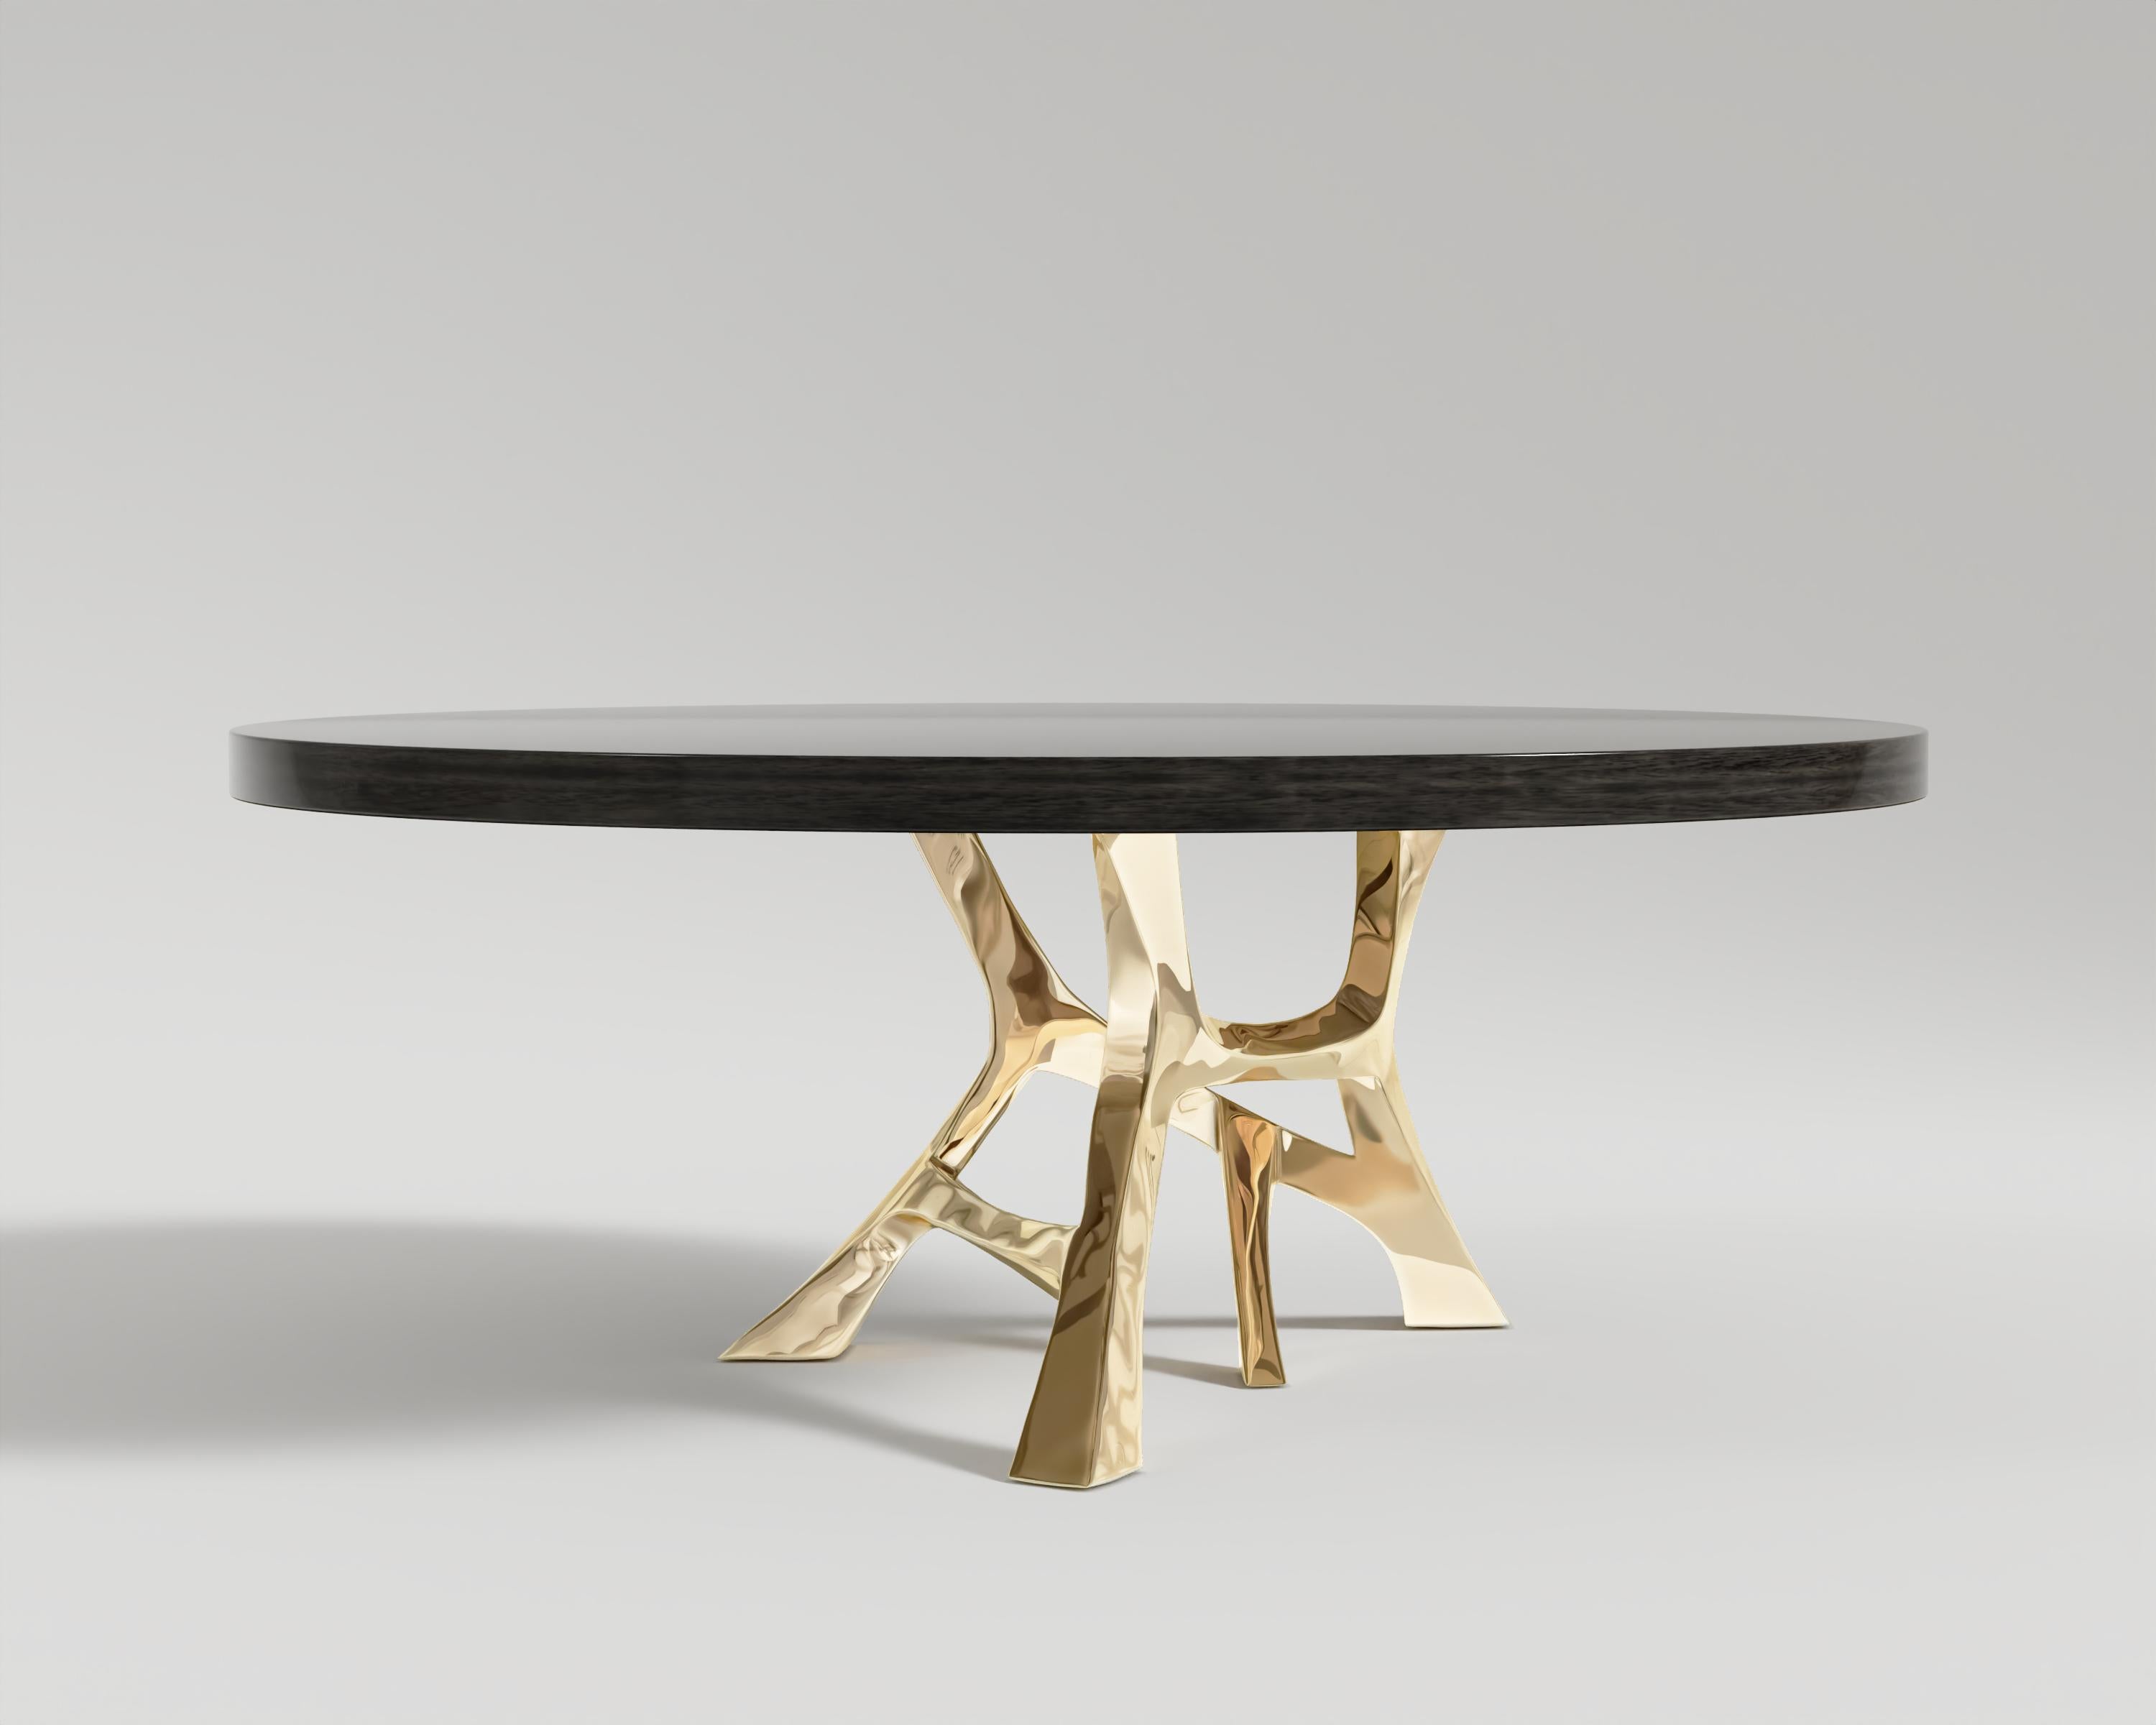 Turkish Vena Round Dining Table Polished Bronze and Black Lacquer Tabletop by Palena For Sale